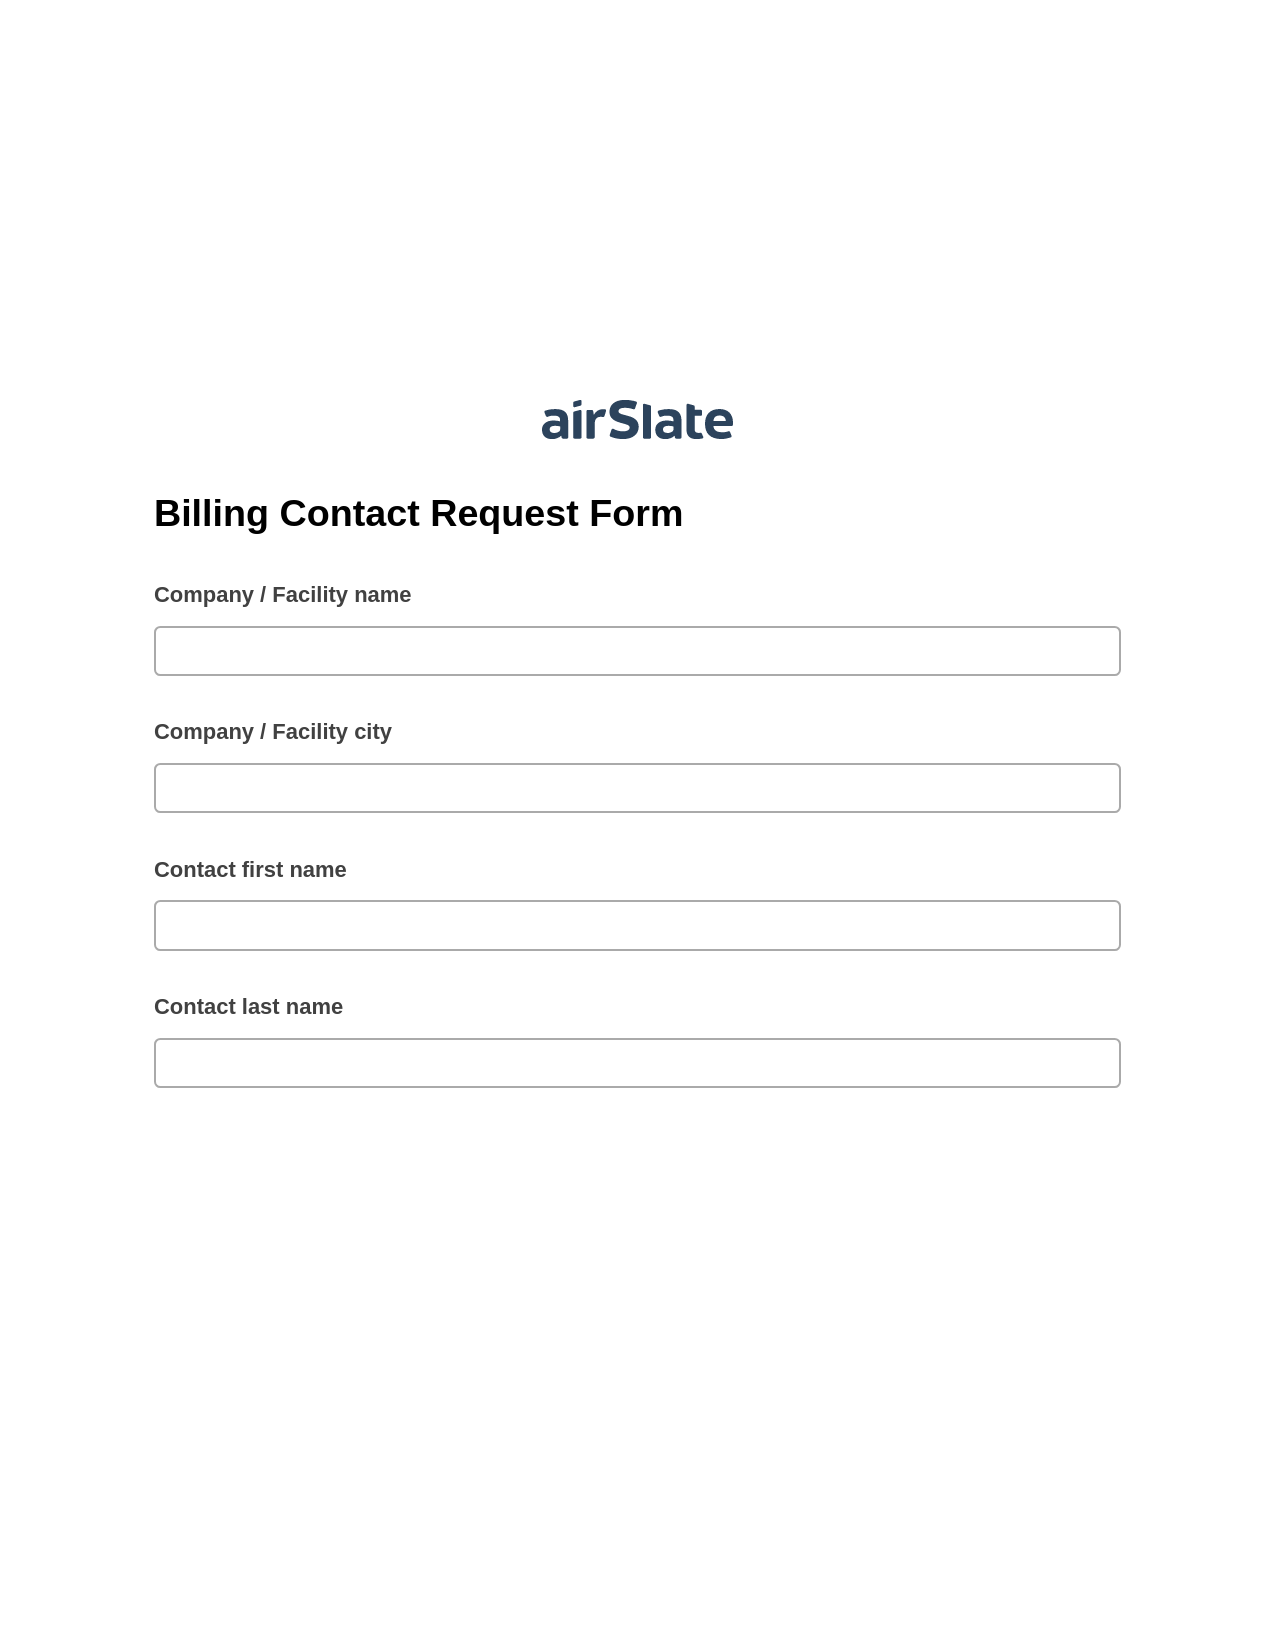 Multirole Billing Contact Request Form Pre-fill from CSV File Bot, Slack Notification Bot, Webhook Postfinish Bot